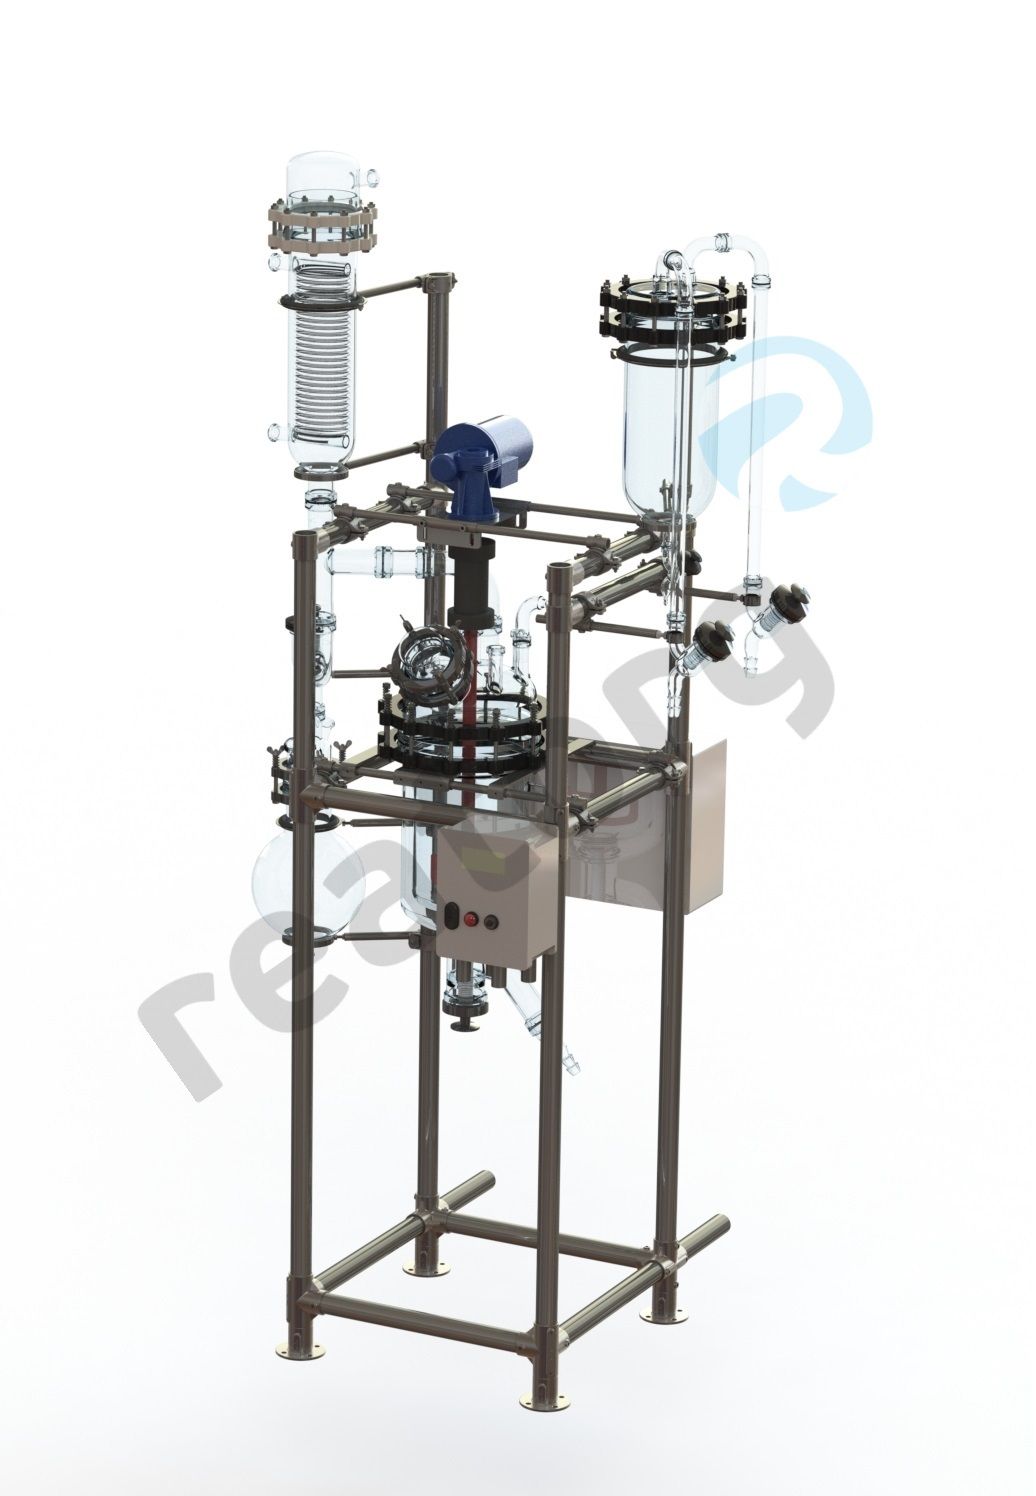 Reactor system Reatorg Technologies™ based on a glass jacketed reactor 15L